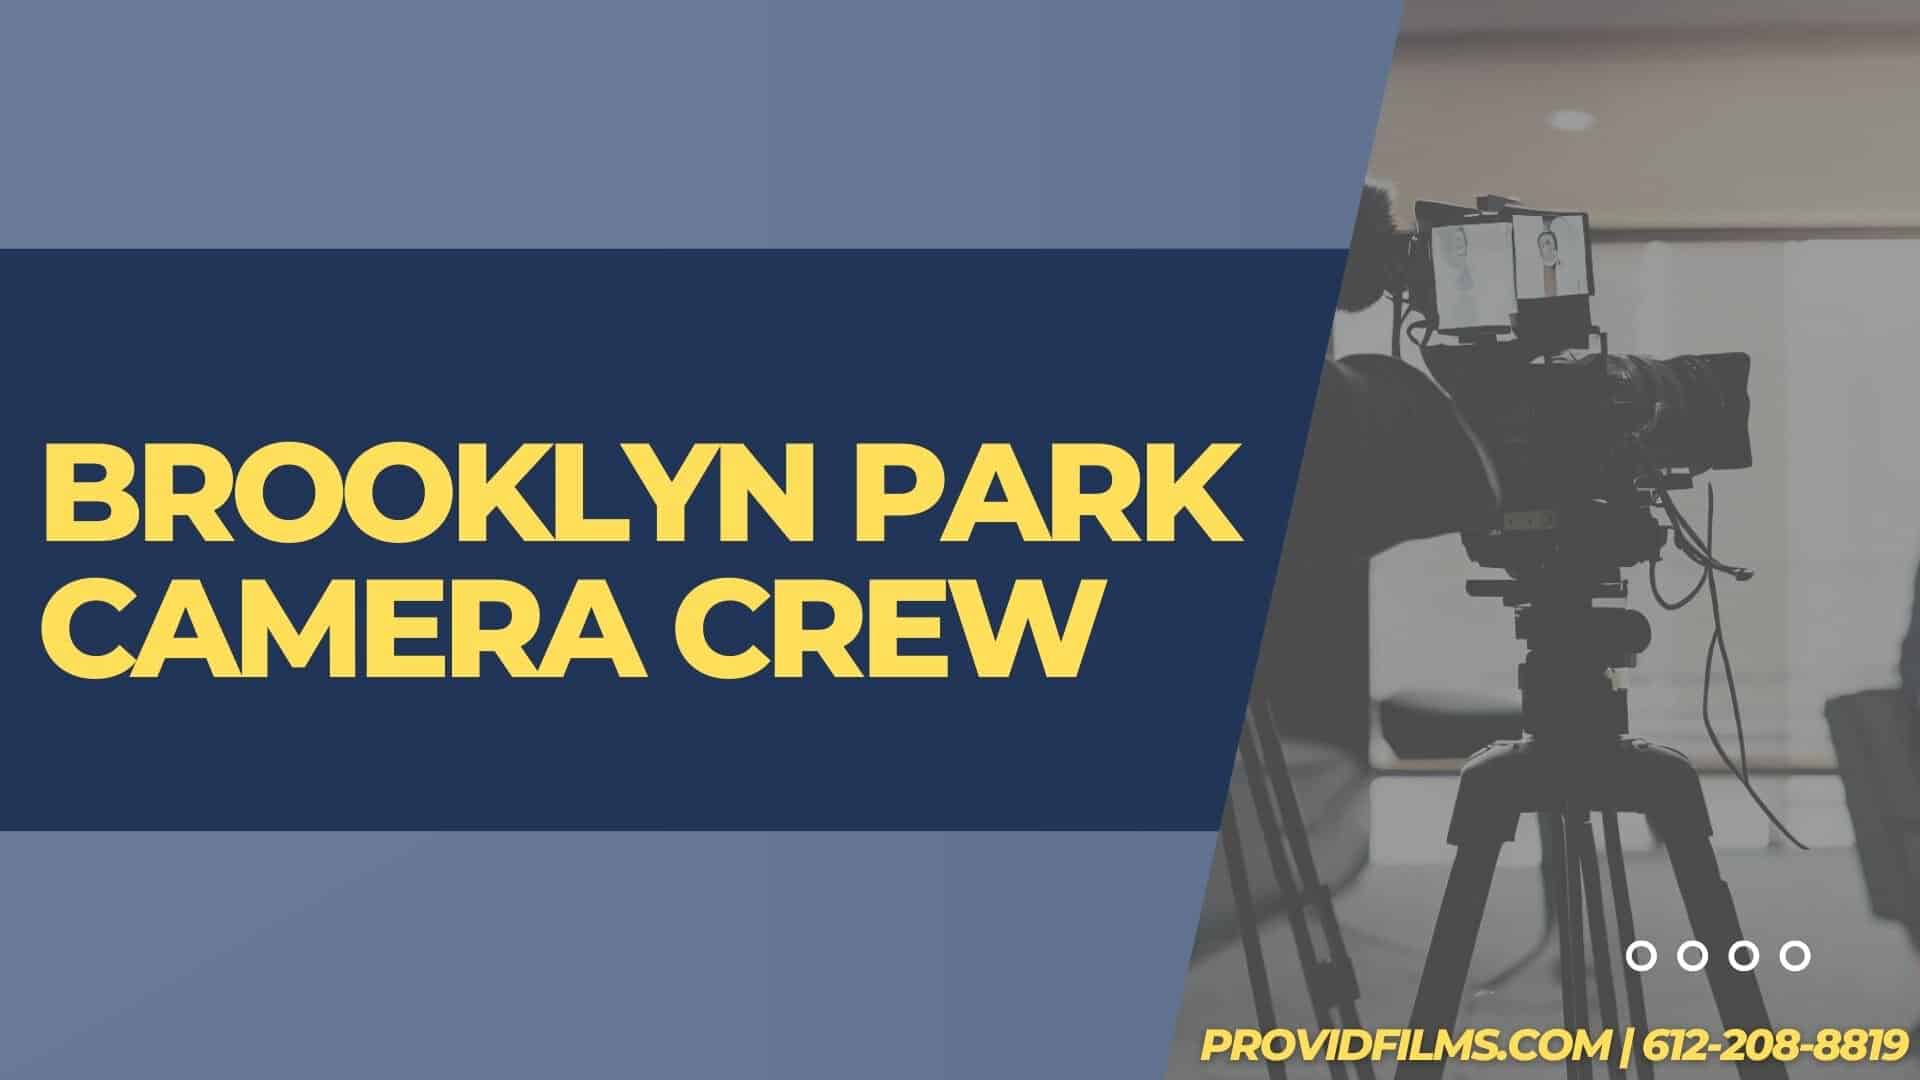 Graphic of a video camera with the text saying "Brooklyn Park Camera Crew"